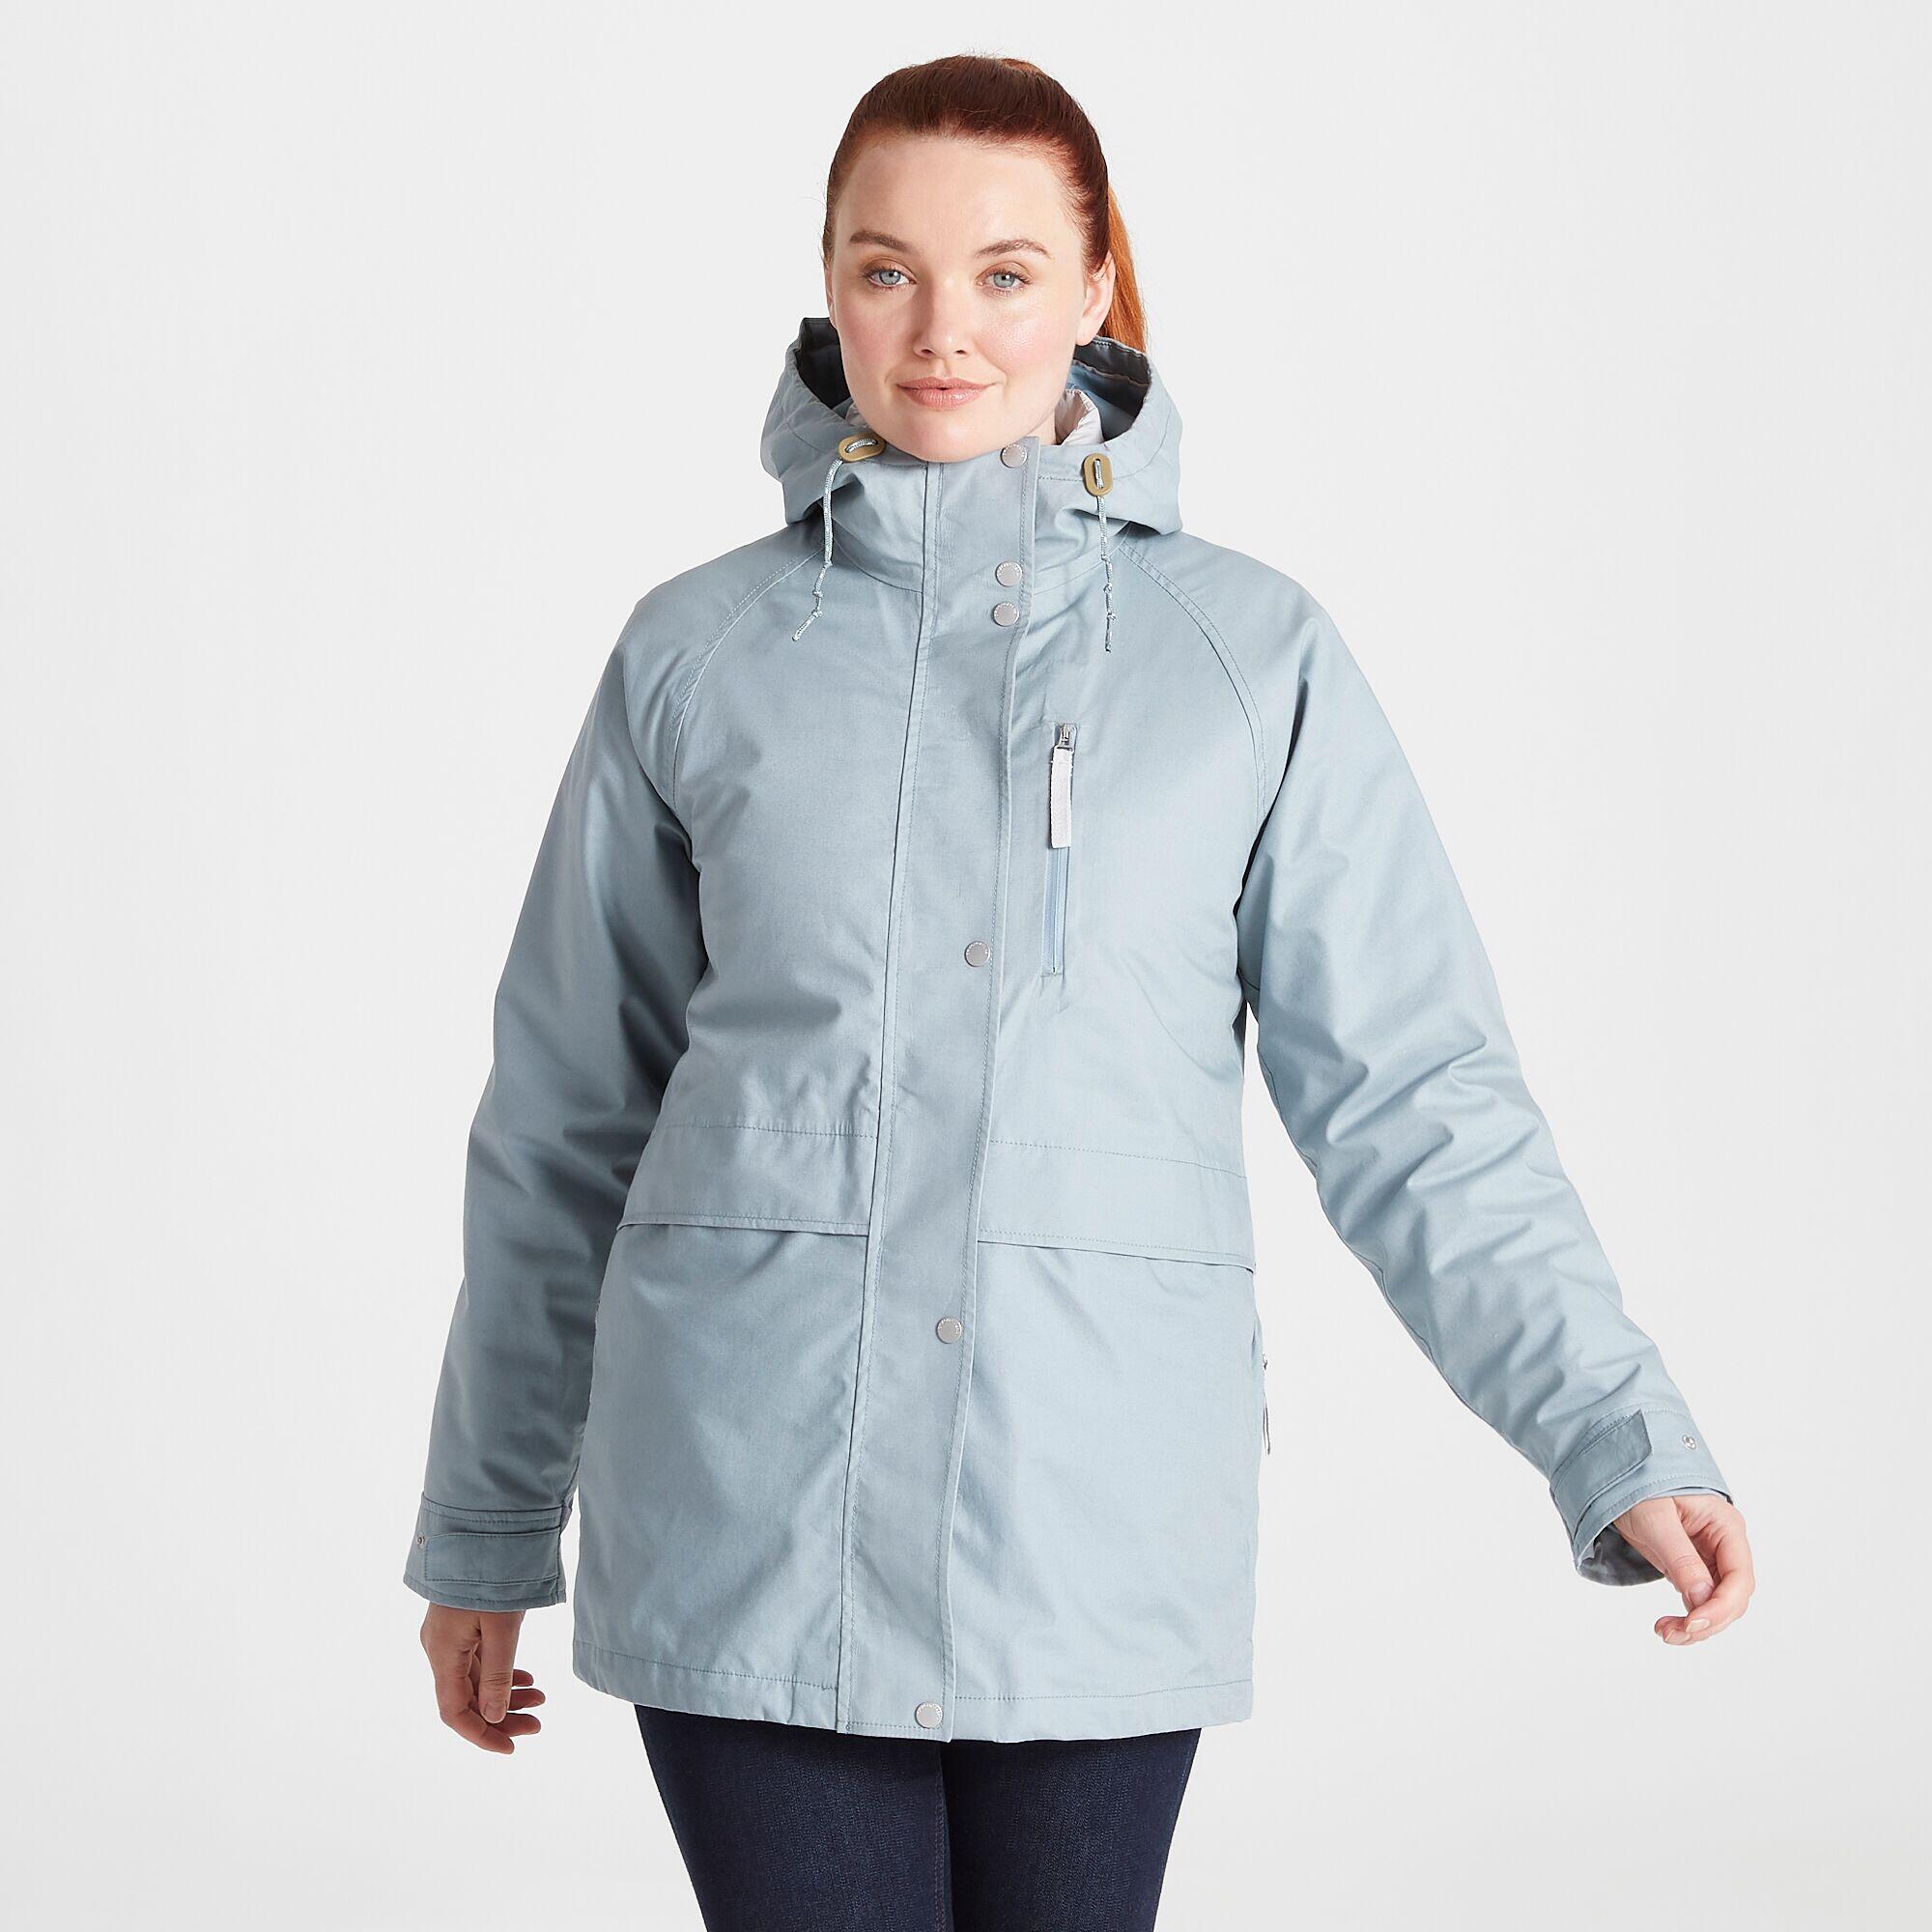 Womens Saltaire 3 in 1 Jacket 4/5